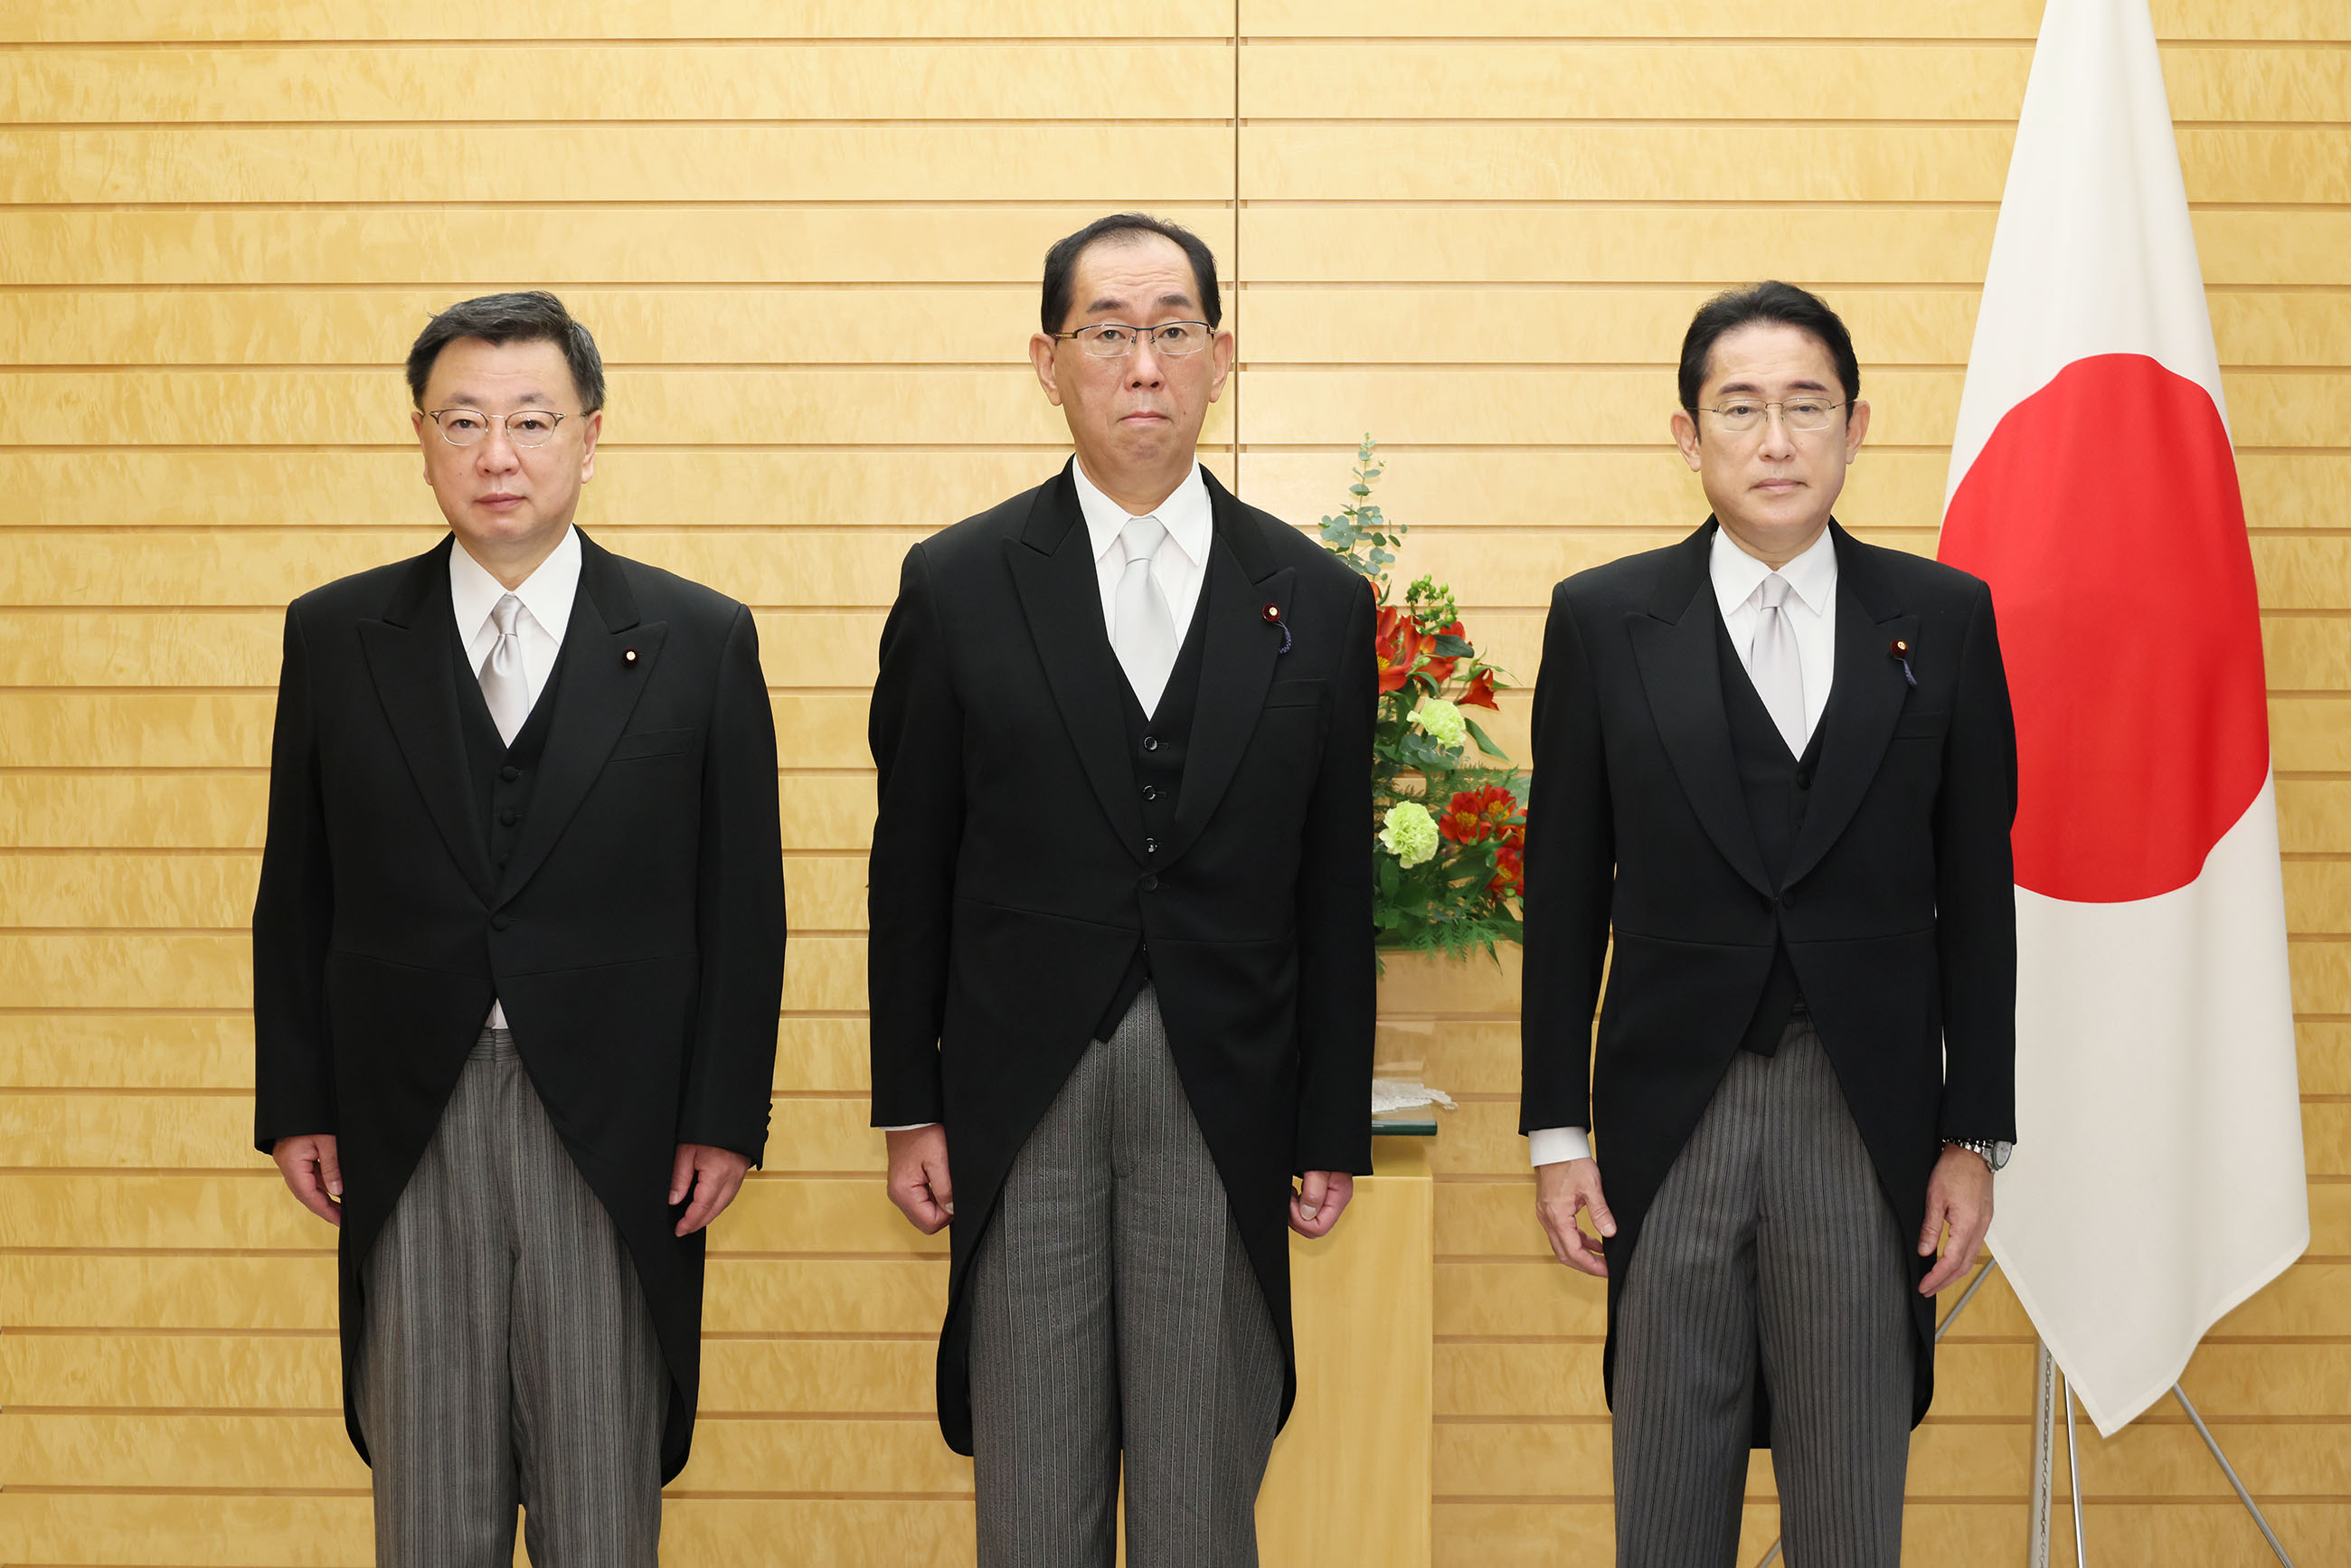 Prime Minister Kishida attending a photograph session with Minister Matsumoto (2)